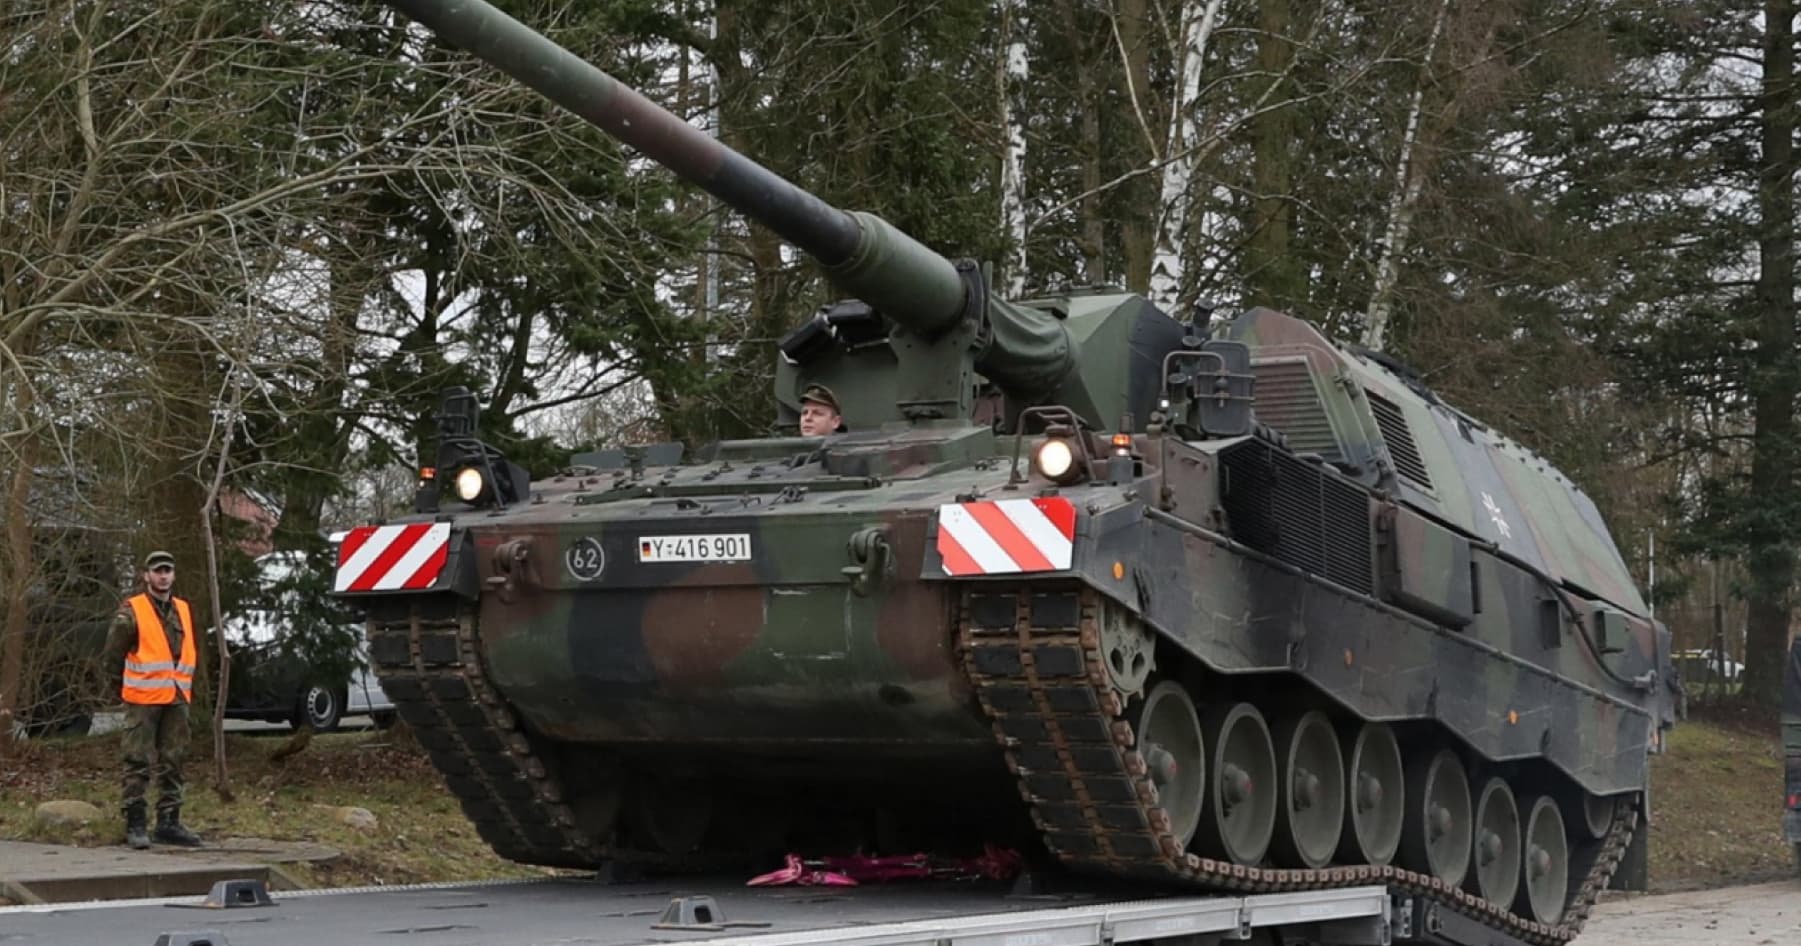 Italy handed over "20 to 30" M109L self-propelled artillery systems to Kyiv - the Italian newspaper La Repubblica